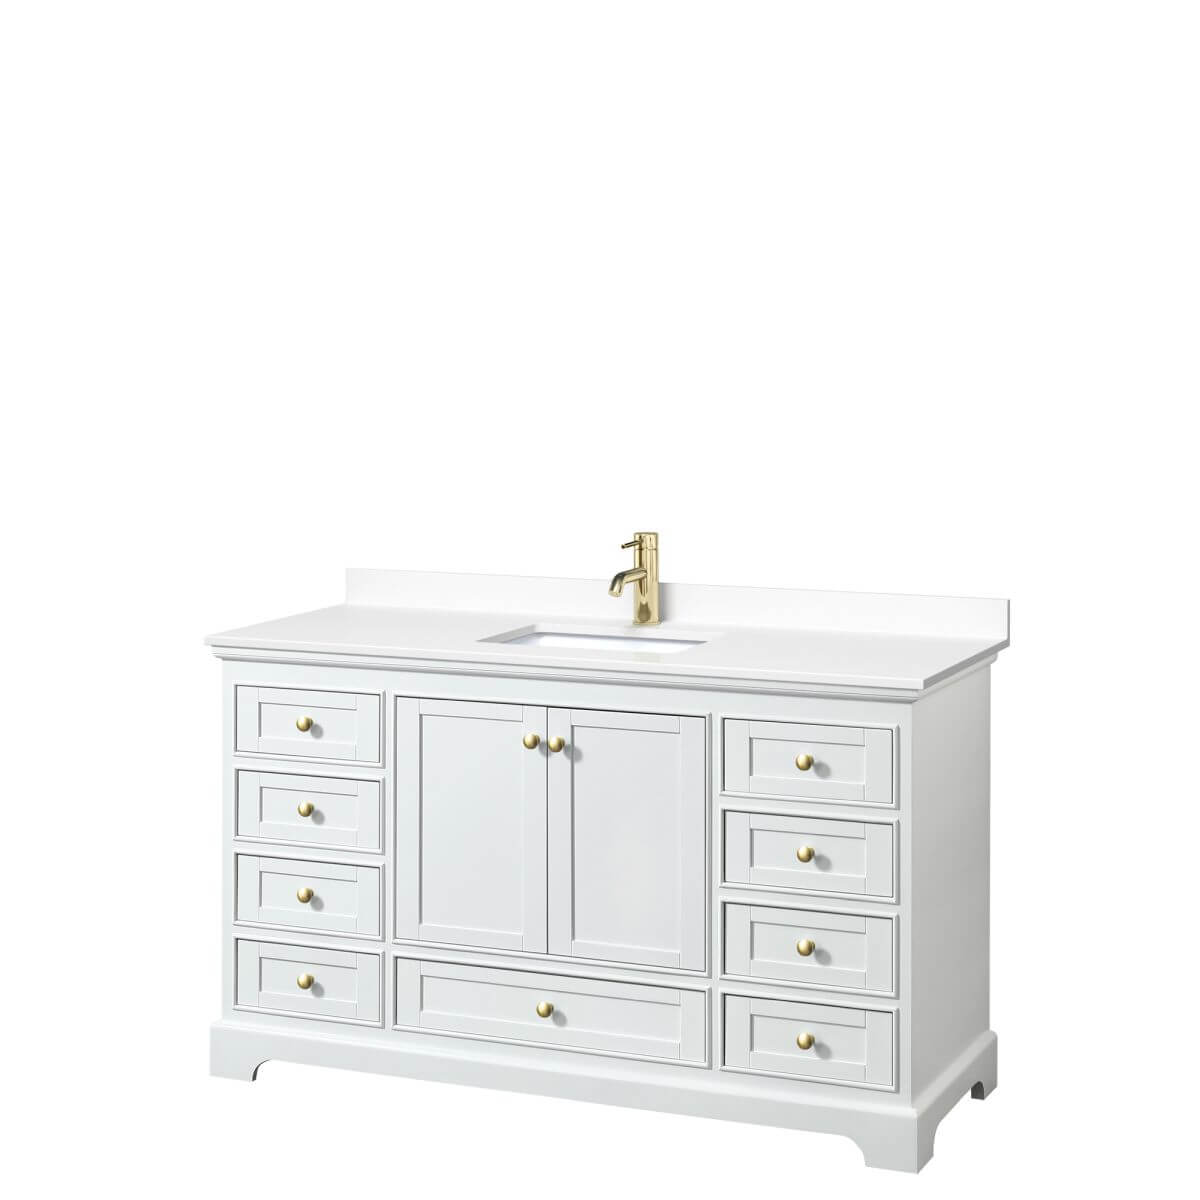 Wyndham Collection Deborah 60 inch Single Bathroom Vanity in White with White Cultured Marble Countertop, Undermount Square Sink, Brushed Gold Trim and No Mirror - WCS202060SWGWCUNSMXX